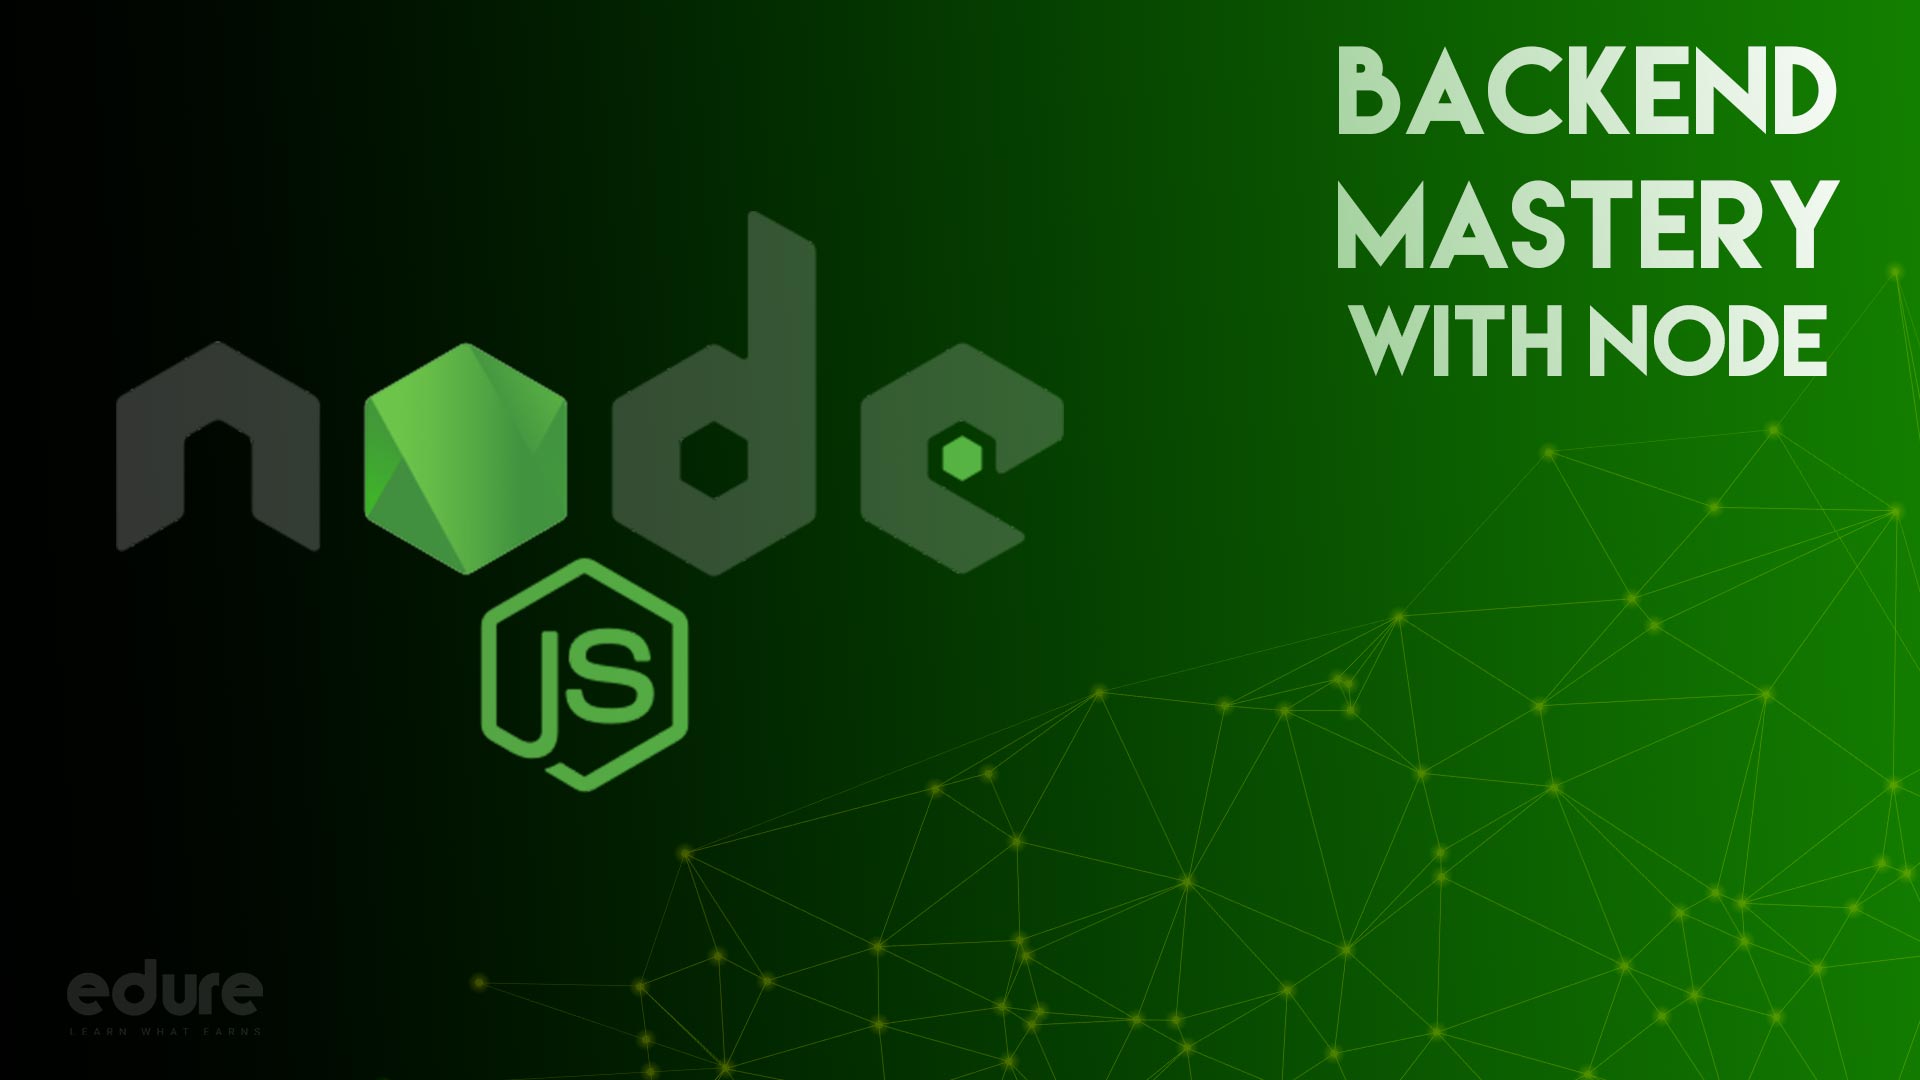 BACKEND MASTERY WITH NODE